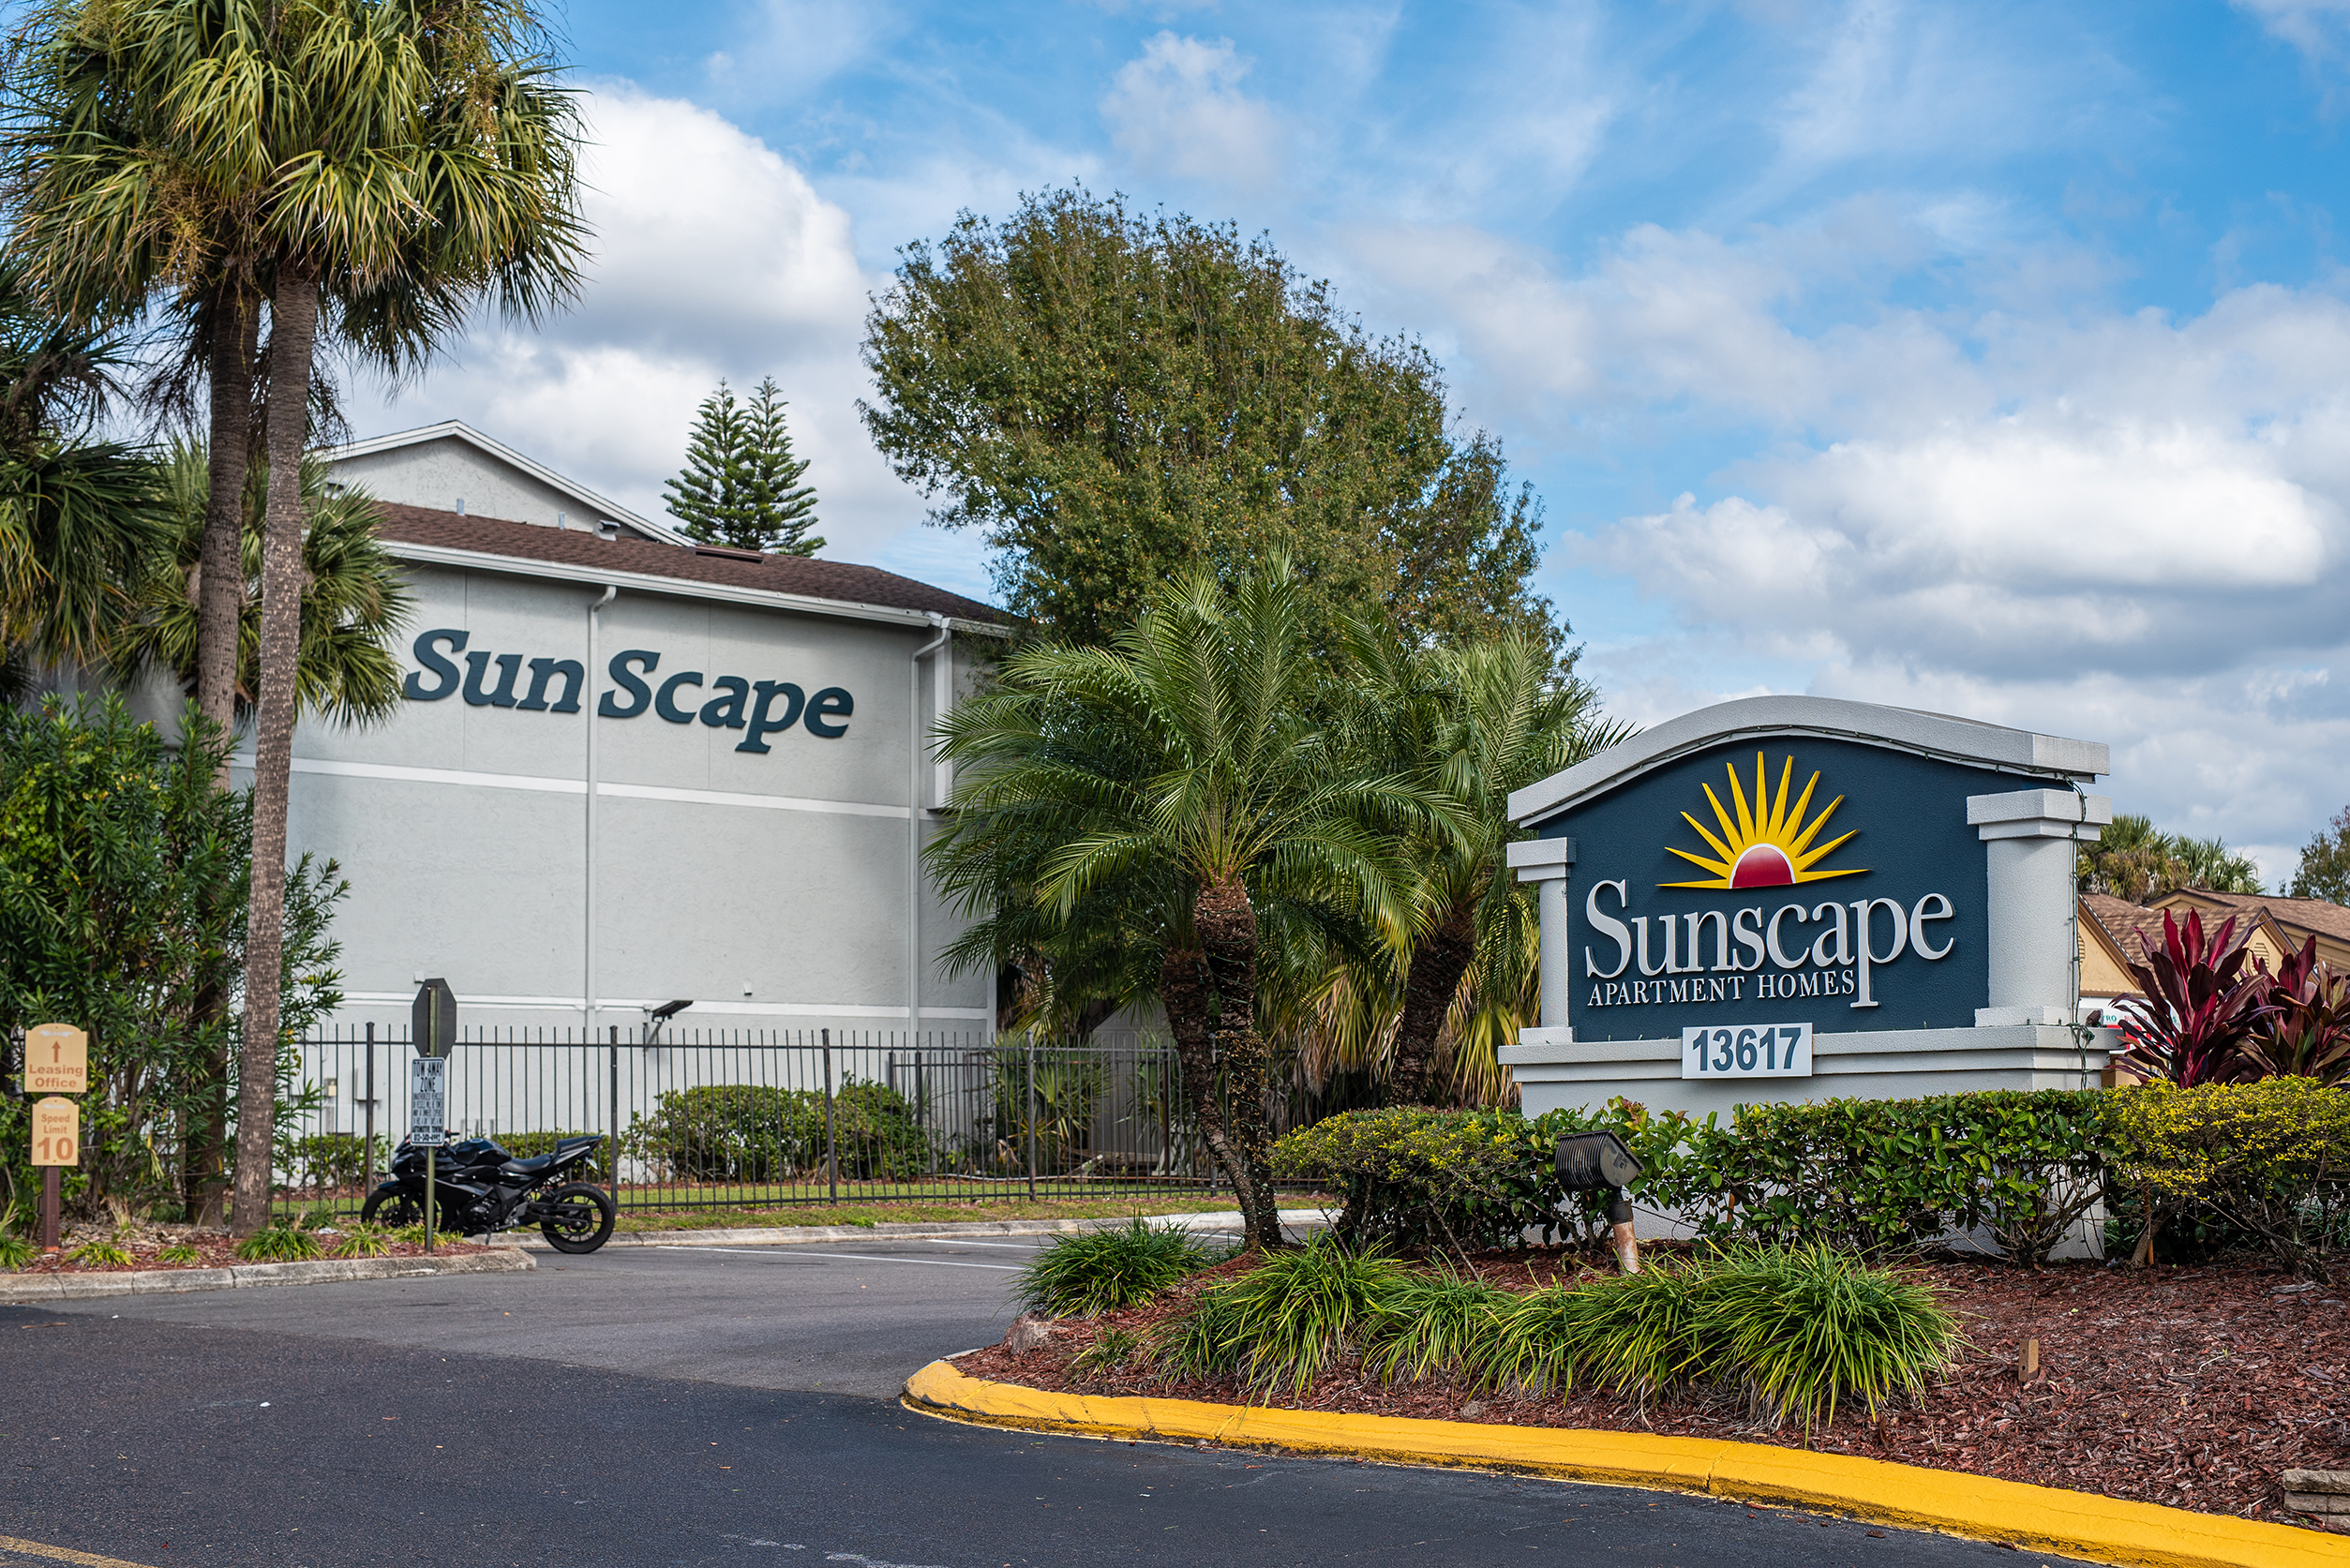 Entrance to Sunscape Apartment Homes